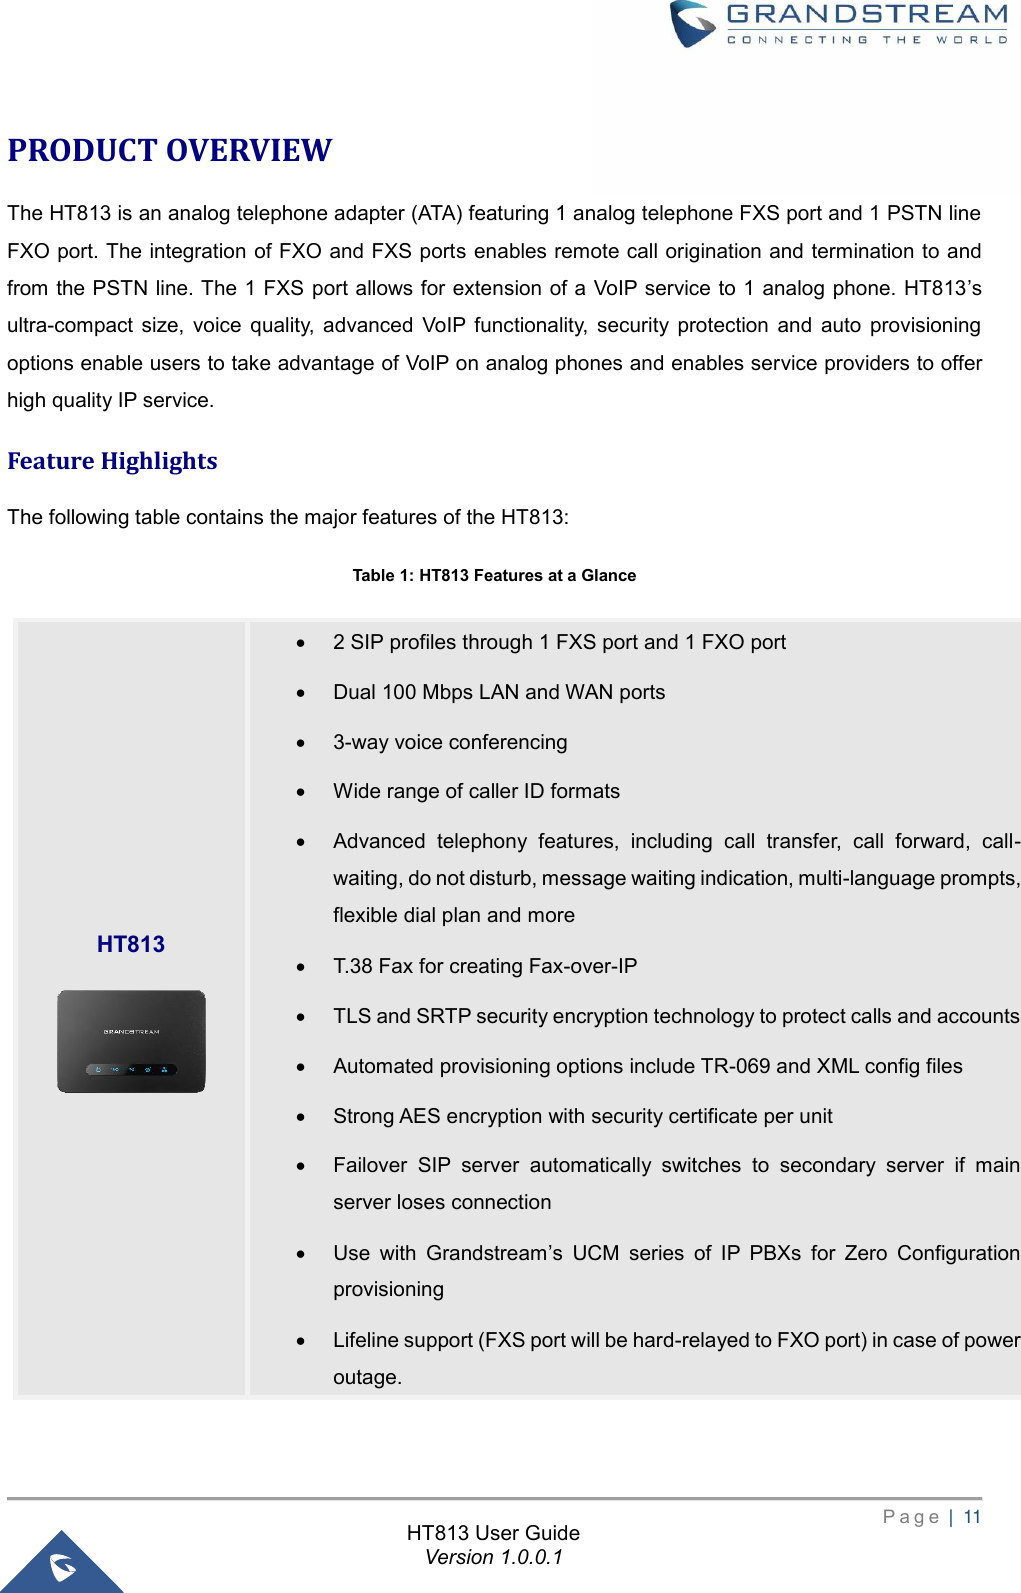       P a g e  |  11       HT813 User Guide Version 1.0.0.1  PRODUCT OVERVIEW The HT813 is an analog telephone adapter (ATA) featuring 1 analog telephone FXS port and 1 PSTN line FXO port. The integration of FXO and FXS ports enables remote call origination and termination to and from the PSTN line. The 1 FXS port allows for extension of a VoIP service to 1 analog phone. HT813’s ultra-compact size,  voice  quality,  advanced  VoIP  functionality,  security  protection  and  auto  provisioning options enable users to take advantage of VoIP on analog phones and enables service providers to offer high quality IP service.   Feature Highlights The following table contains the major features of the HT813: Table 1: HT813 Features at a Glance  HT813  • 2 SIP profiles through 1 FXS port and 1 FXO port • Dual 100 Mbps LAN and WAN ports • 3-way voice conferencing • Wide range of caller ID formats • Advanced  telephony  features,  including  call  transfer,  call  forward,  call-waiting, do not disturb, message waiting indication, multi-language prompts, flexible dial plan and more • T.38 Fax for creating Fax-over-IP   • TLS and SRTP security encryption technology to protect calls and accounts • Automated provisioning options include TR-069 and XML config files • Strong AES encryption with security certificate per unit • Failover  SIP  server  automatically  switches  to  secondary  server  if  main server loses connection • Use  with  Grandstream’s  UCM  series  of  IP  PBXs  for  Zero  Configuration provisioning • Lifeline support (FXS port will be hard-relayed to FXO port) in case of power outage. 